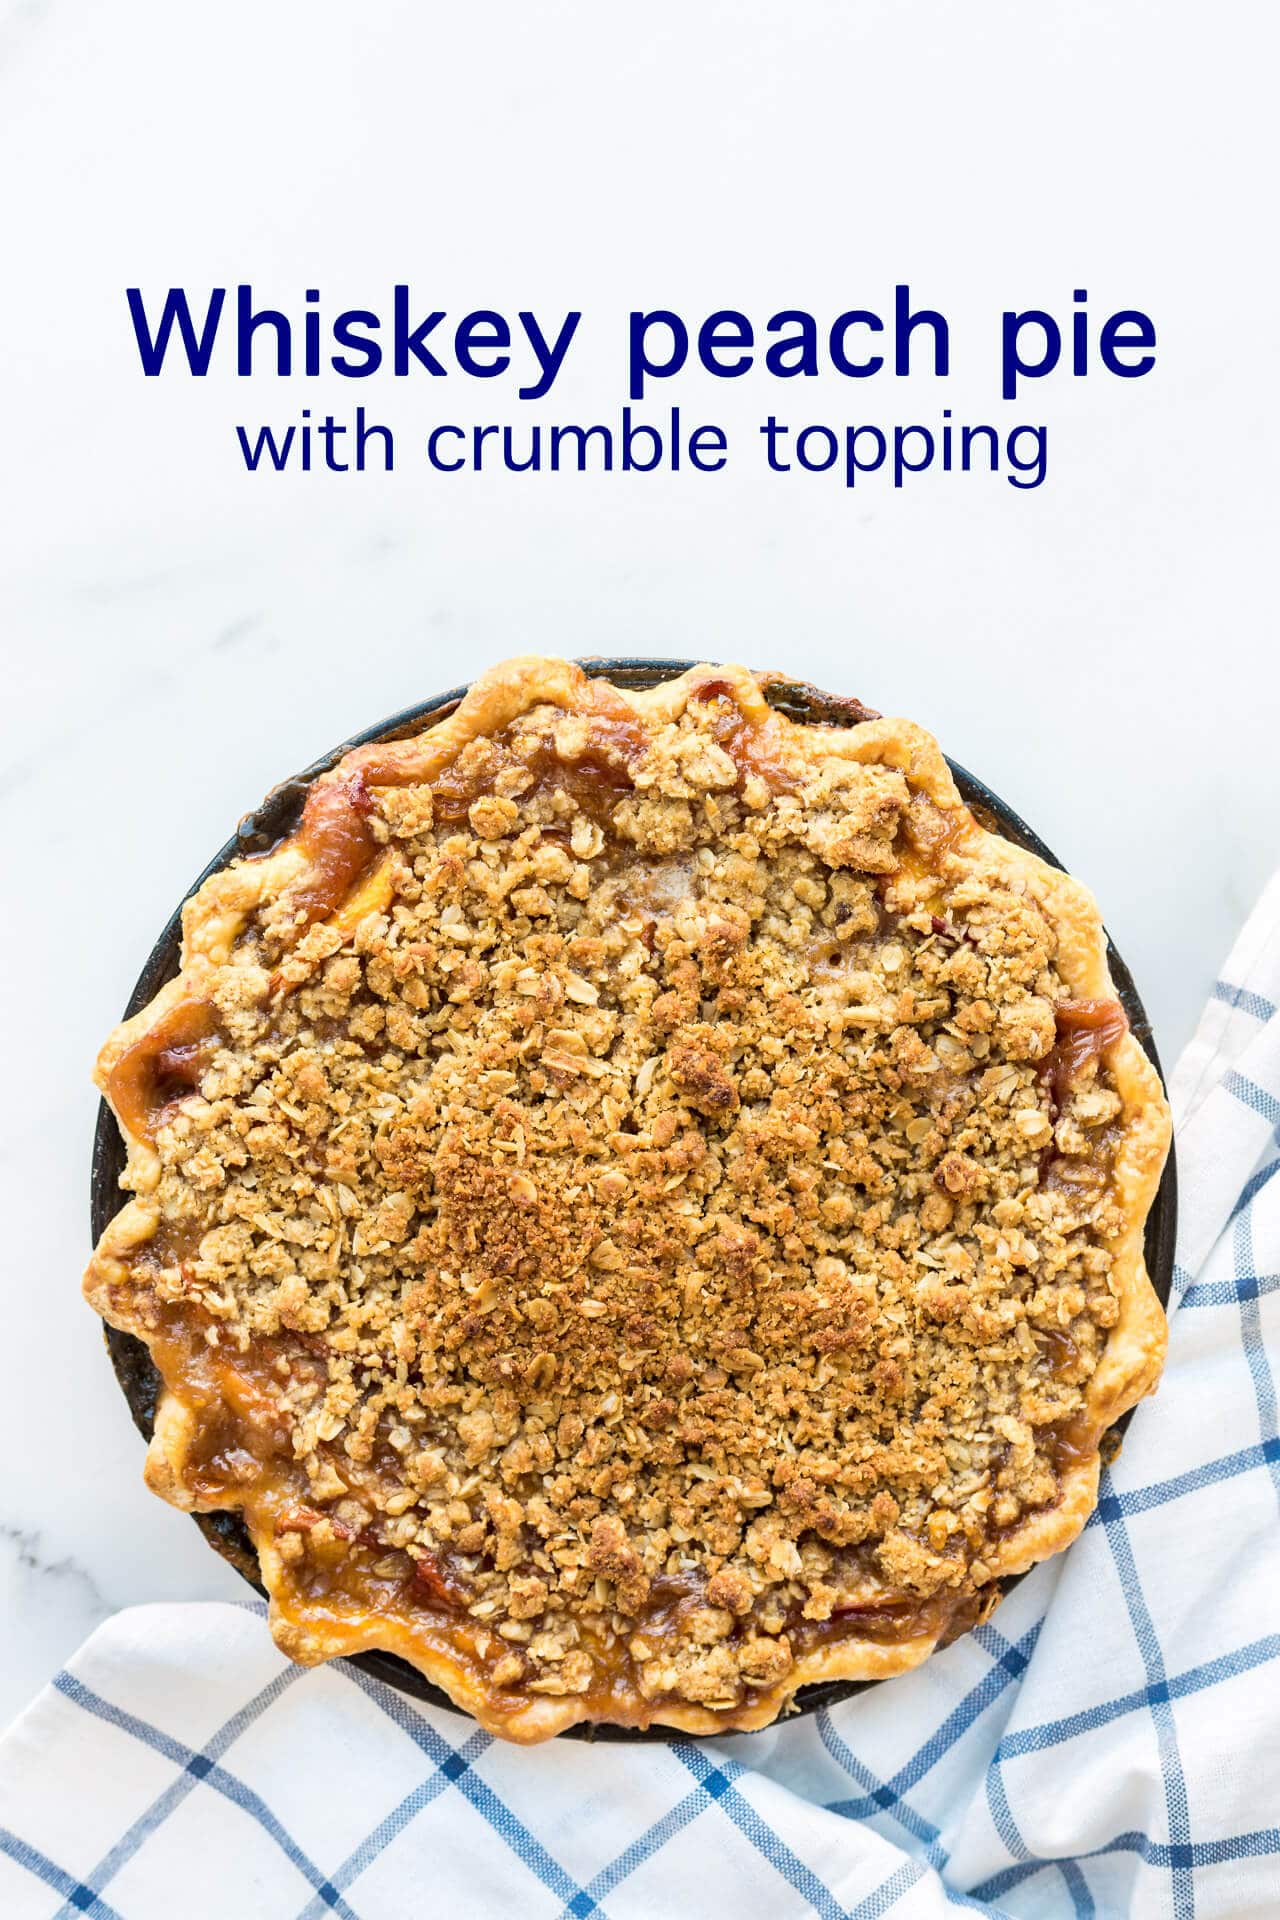 Whiskey peach pie with crumb topping and a crimped edge